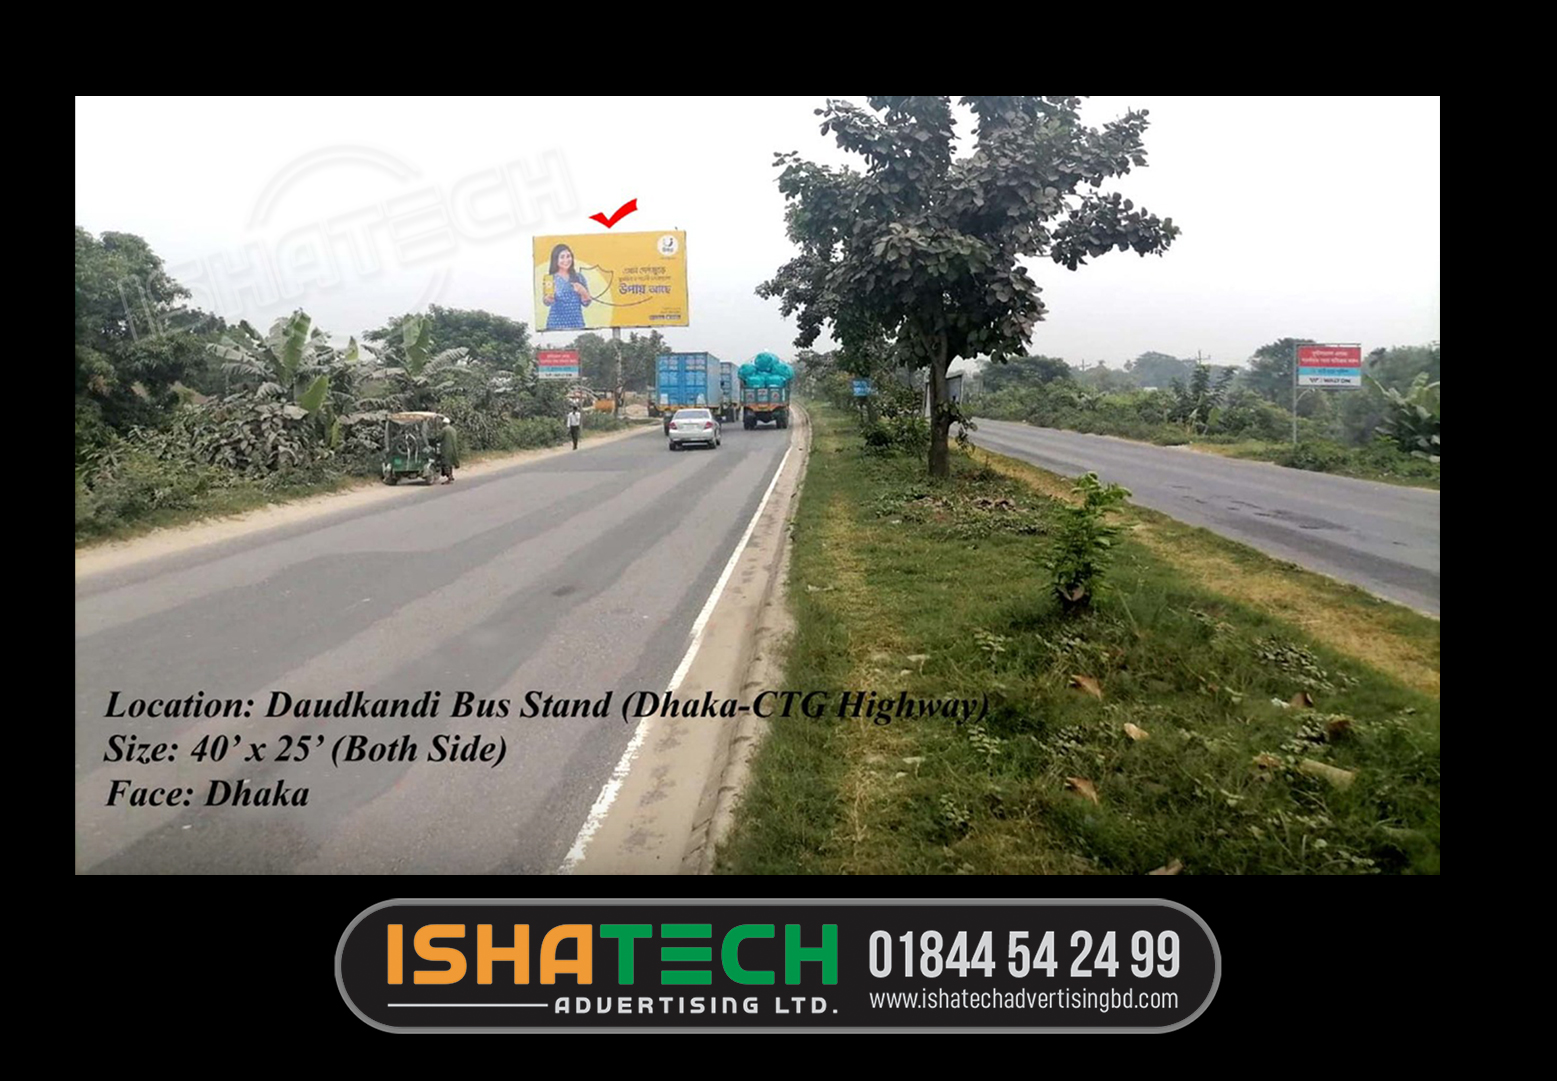 DAUDKANDHI BUS STAND BILLBOARD RENTAL AND MANUFACTURING BD, BEST LED SIGNBOARD MAKER AND MANUFACTURER COMPANY IN DHAKA, BANGLADESH